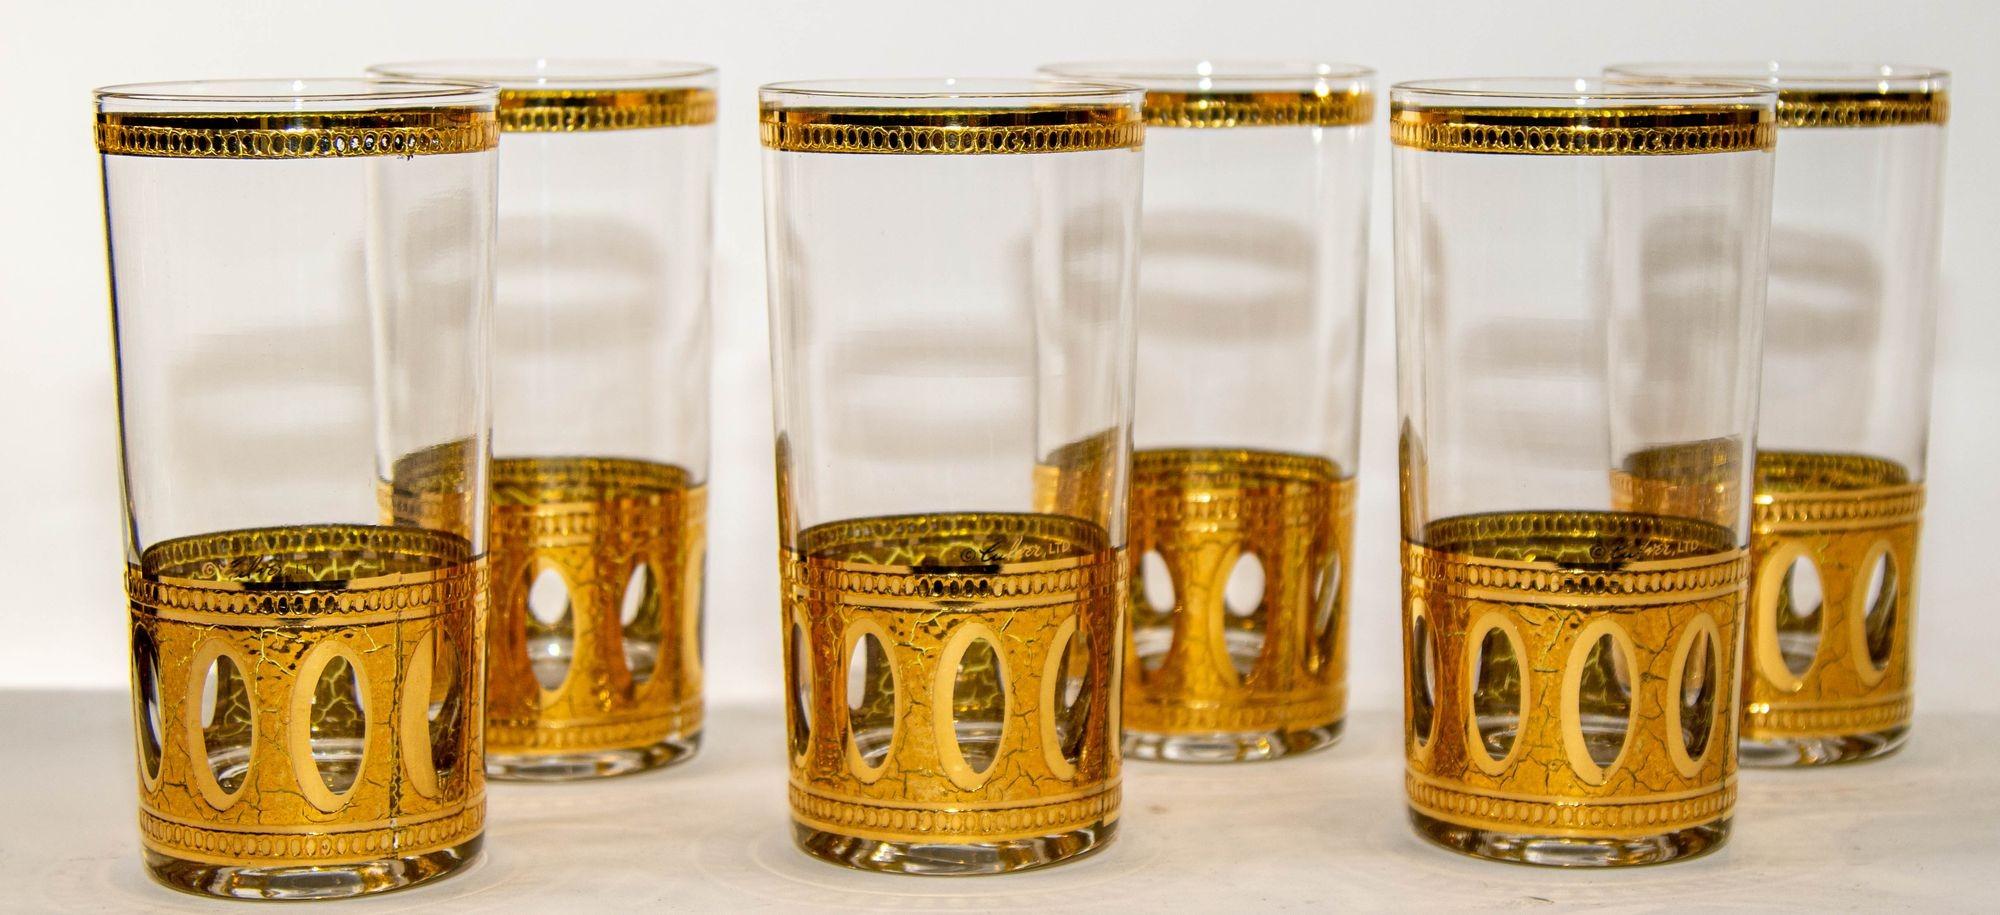 Set of 6 Vintage Cver Ltd Highball Glasses with 22-Karat Gd Antigua Circa 1950.Very Mad Men style and perfect for today's cocktail bar.The Cver Ltd pattern is Antigua 22-karat gd, a perfect mid-century set to add to your barware clection.This